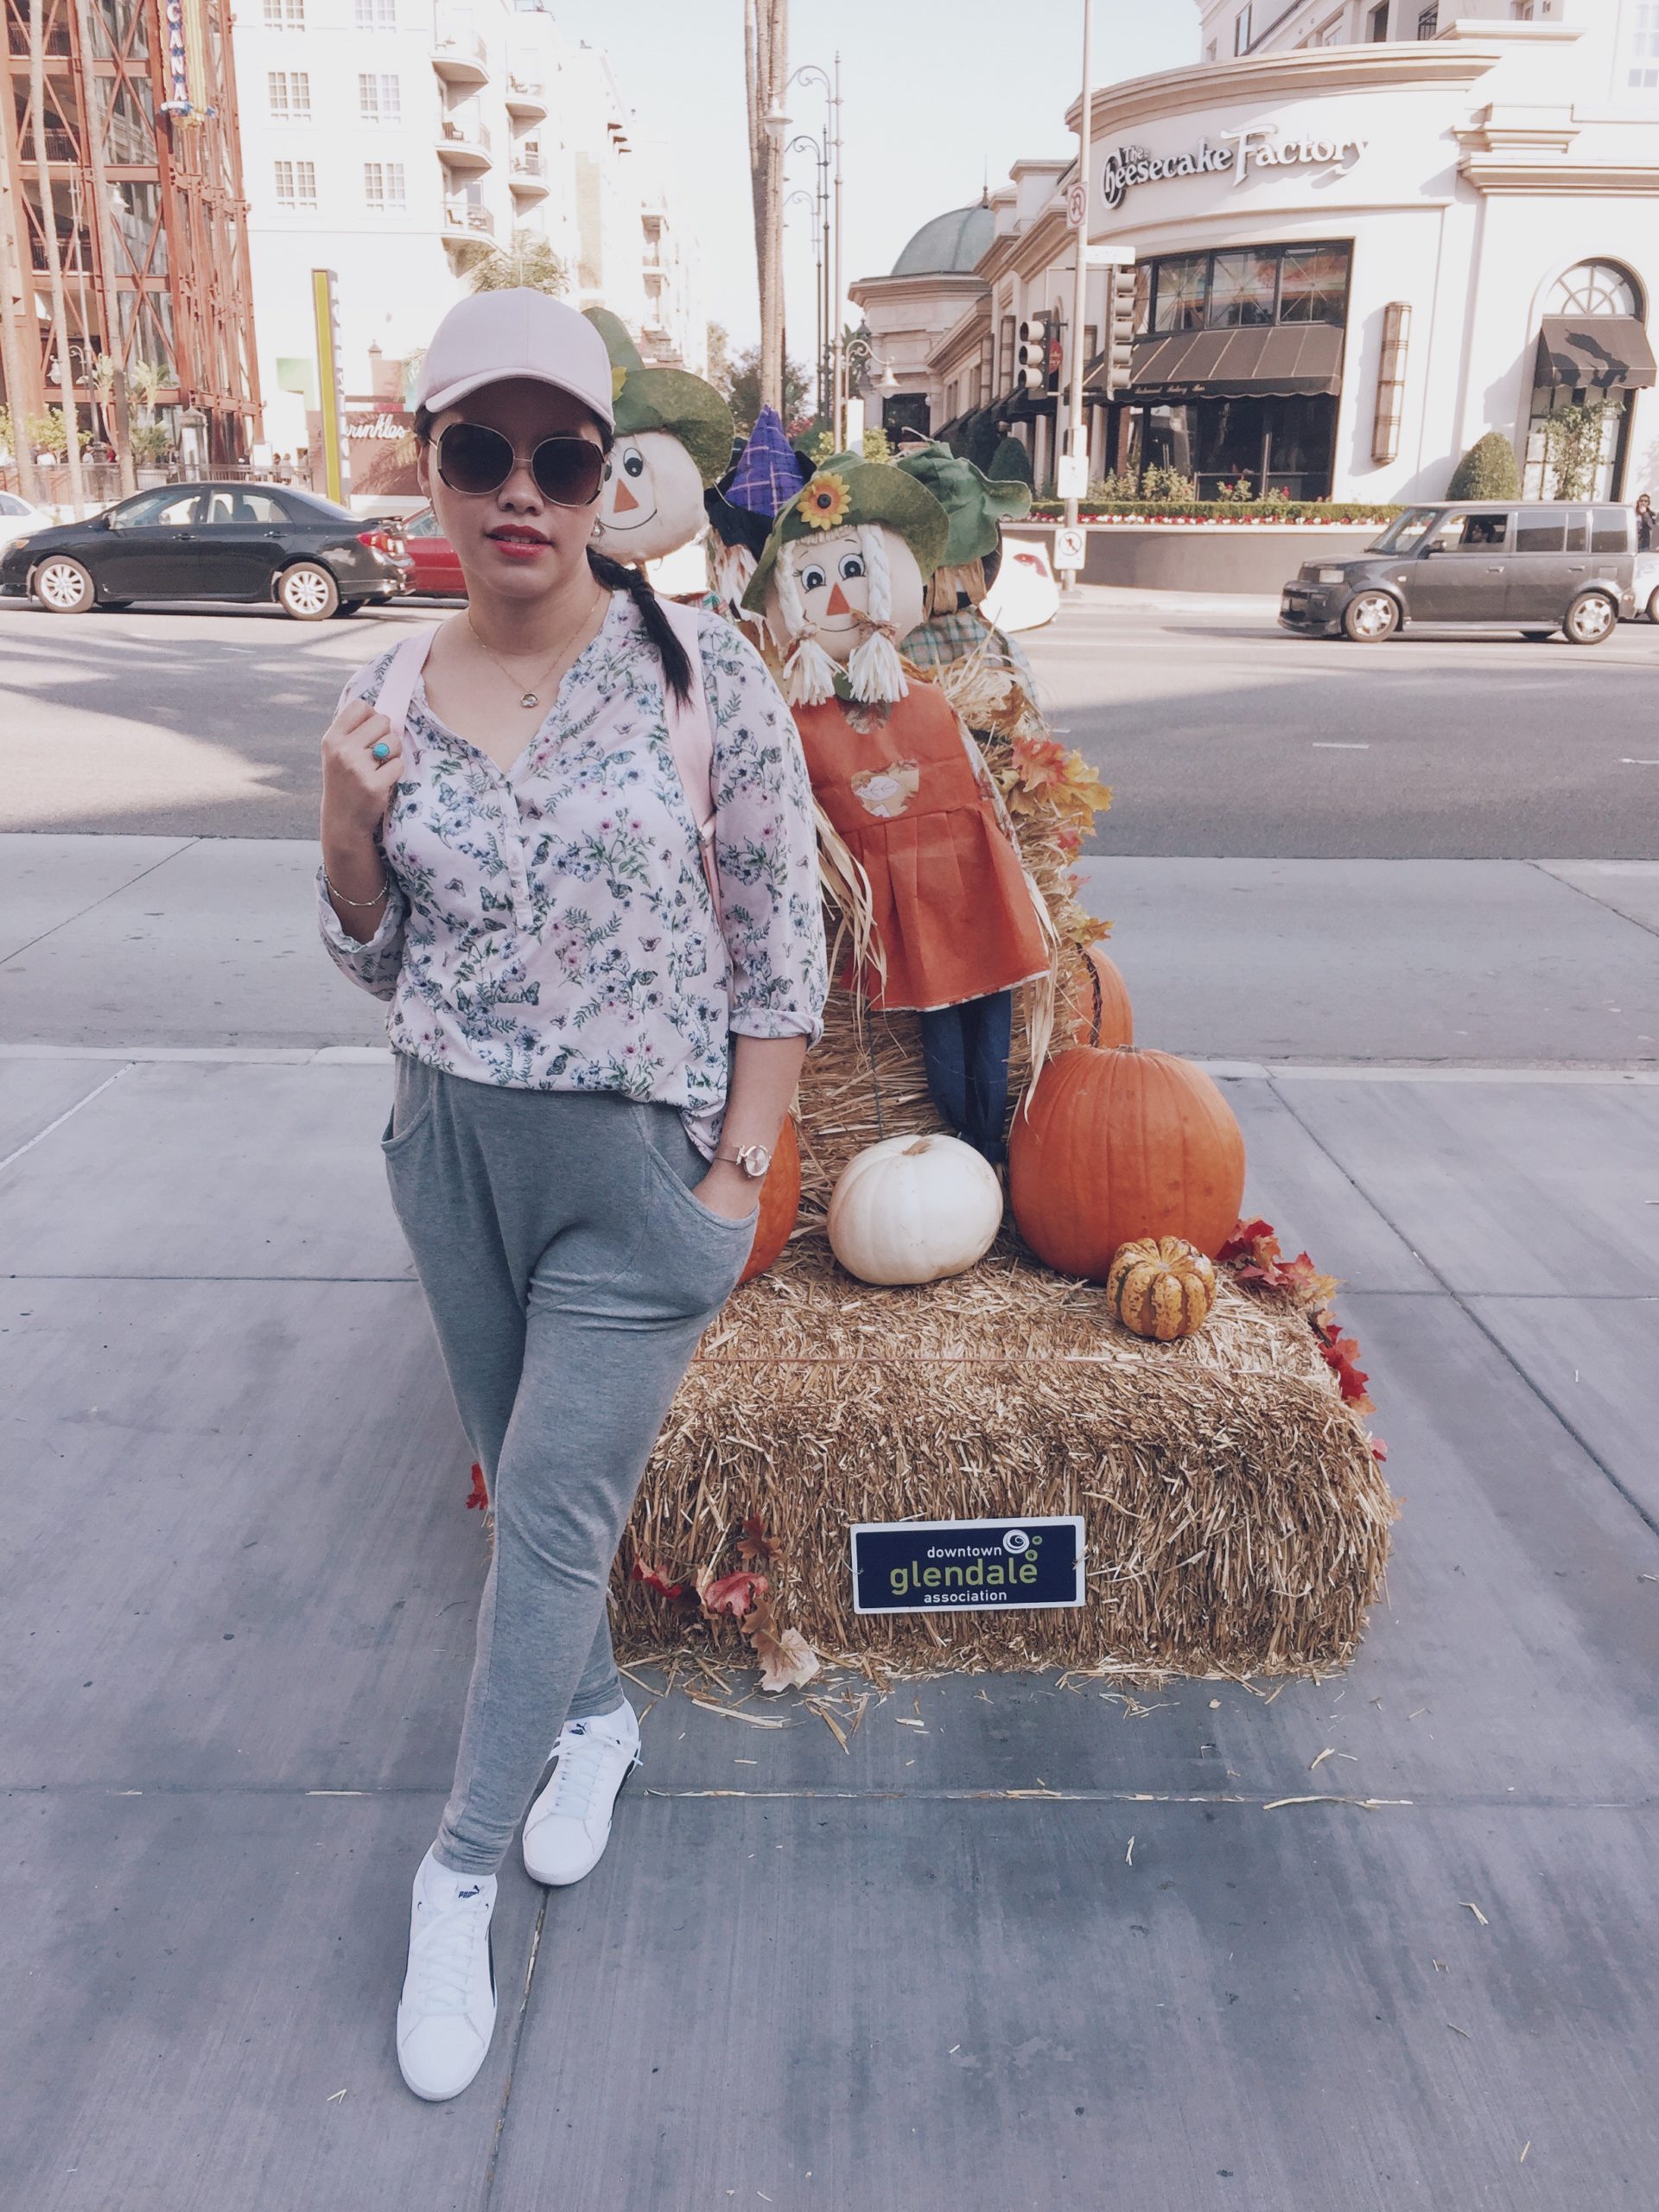 Cheesecake Factory, Downtown Glendale, California, Instagram: @pslilyboutique, Pinterest, Los Angeles fashion blogger, top fashion blog, best fashion blog, fashion & personal style blog, travel blog, travel blogger, LA fashion blogger, Fall 2018 Decor, Fall & Winter 2018 Outfit Ideas, Pumpkins, Glendale Galleria Mall, What is my style, Travel Outfit Ideas 2018, Puma Backpack 